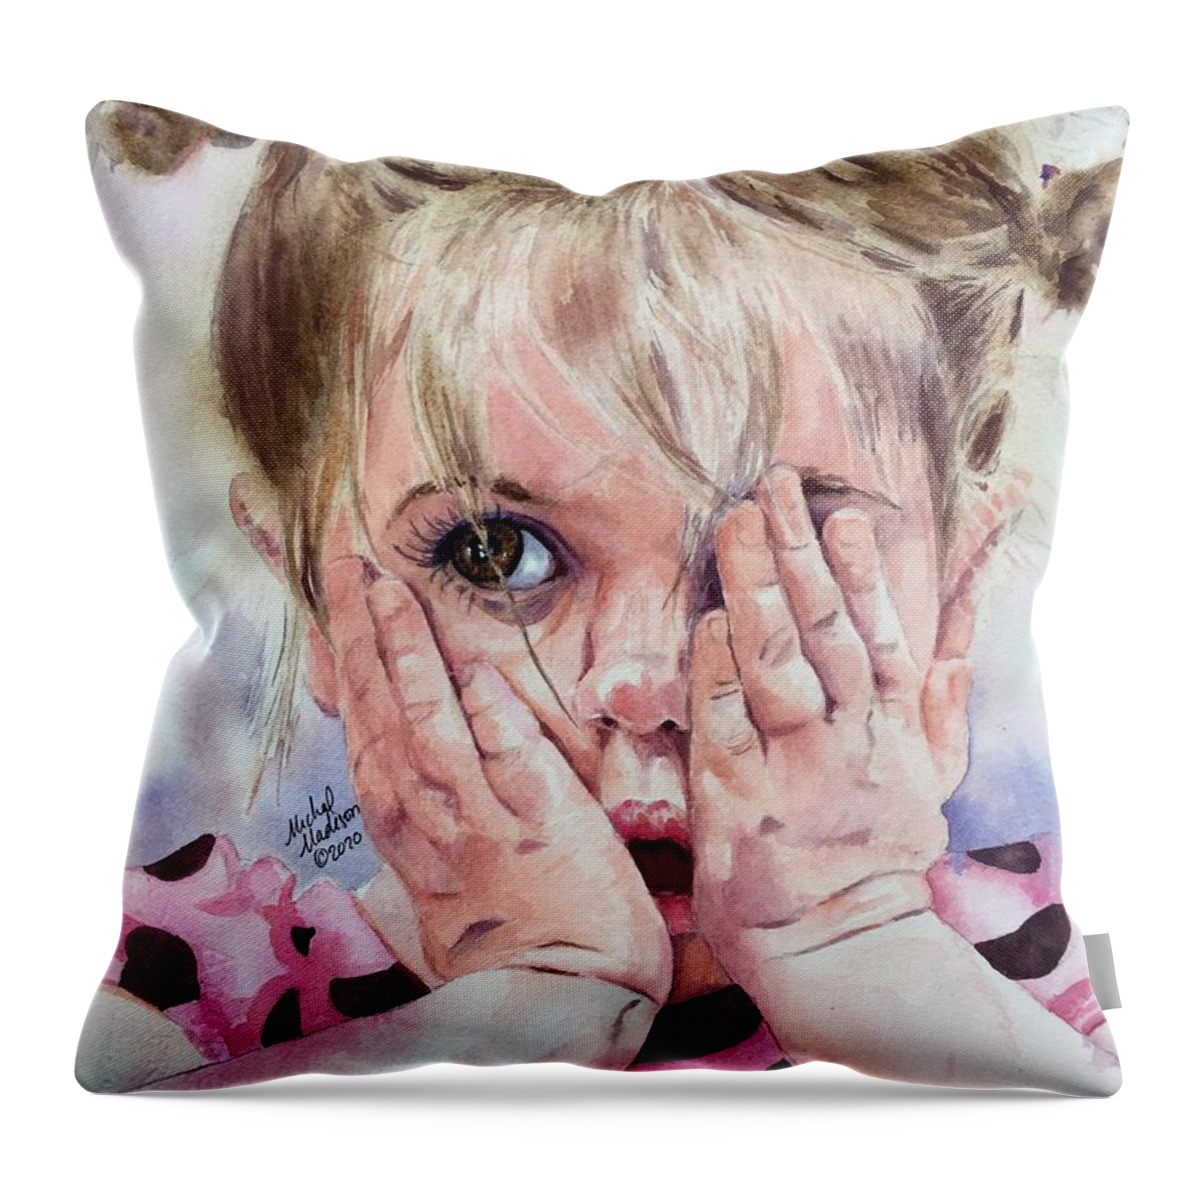 Expressive Child Throw Pillow featuring the painting Oh My by Michal Madison